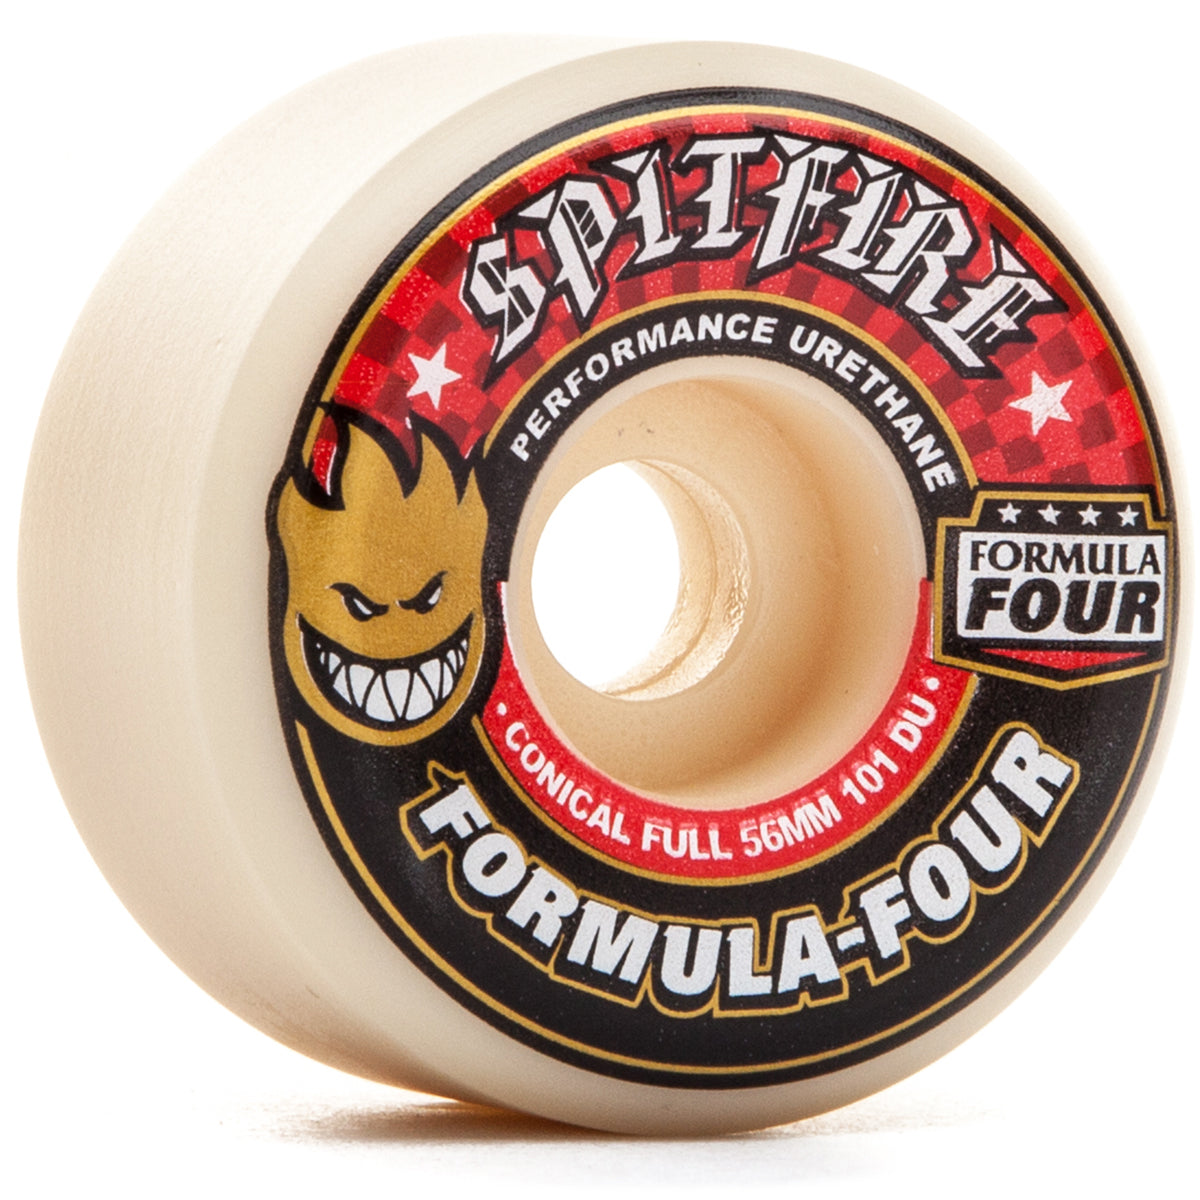 Spitfire Wheels Conical Full F4 101 58mm